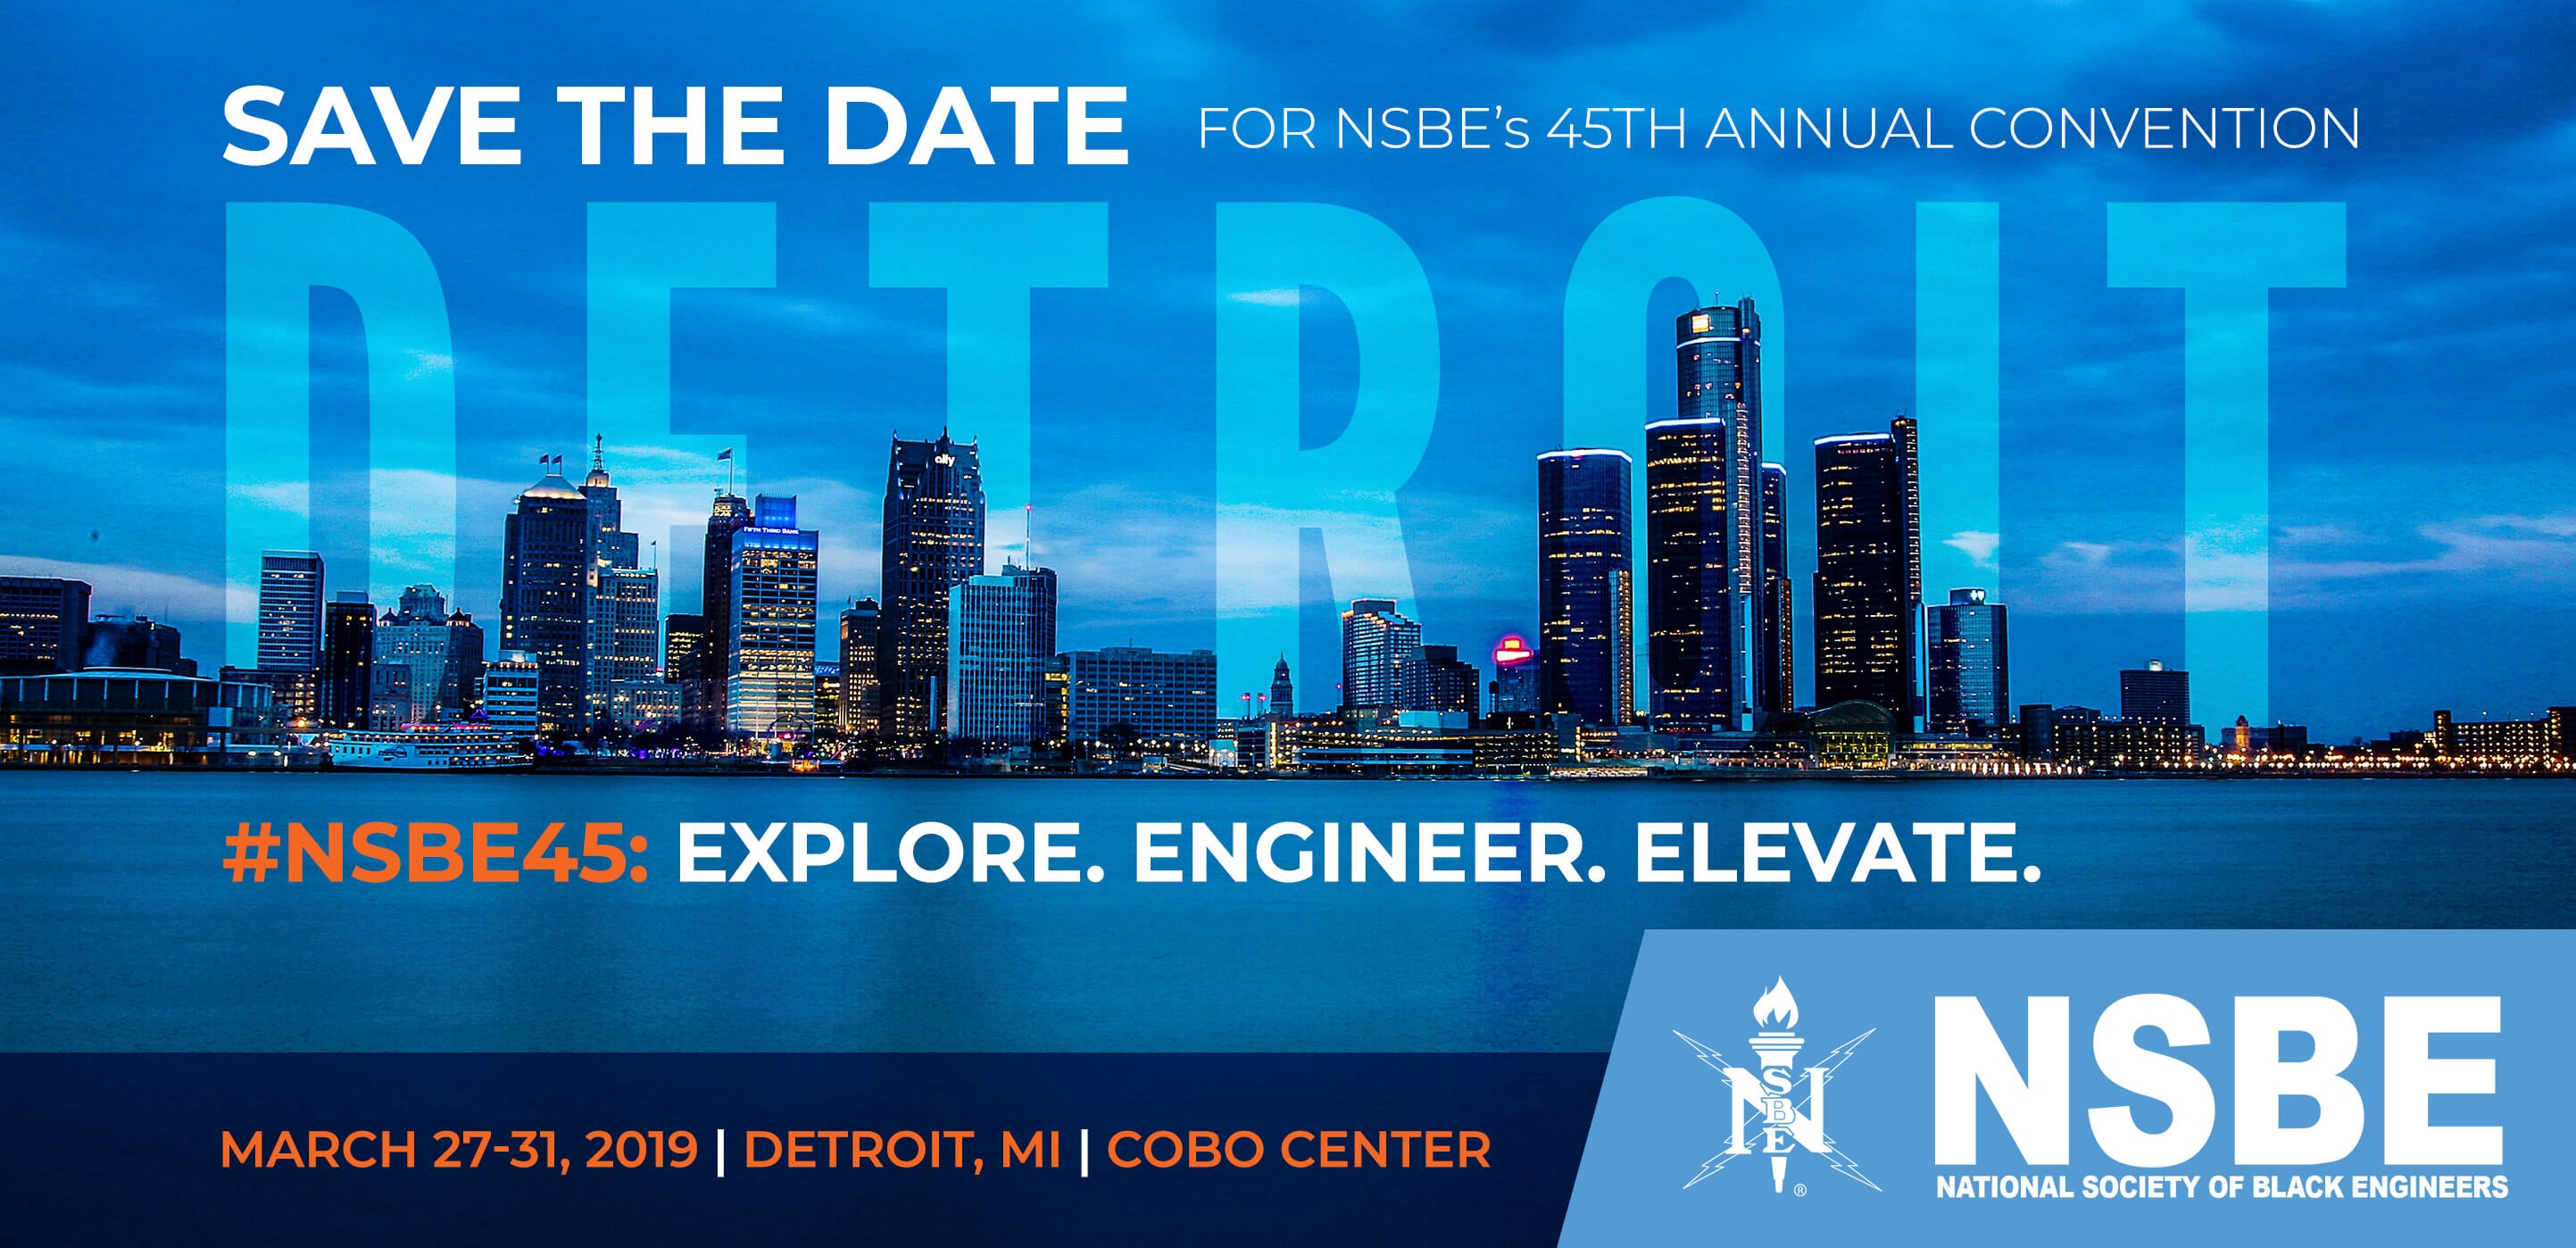 Our annual National Convention, which provides the most benefits for our members, including workshops that enhance personal and professional development and cultural awareness. This event also hosts our largest career fair with over 200 STEM companies ready to hire NSBE members for internships, part-time and even full time jobs. This year it is being held in Detroit, MI, from March 27-31, 2019.